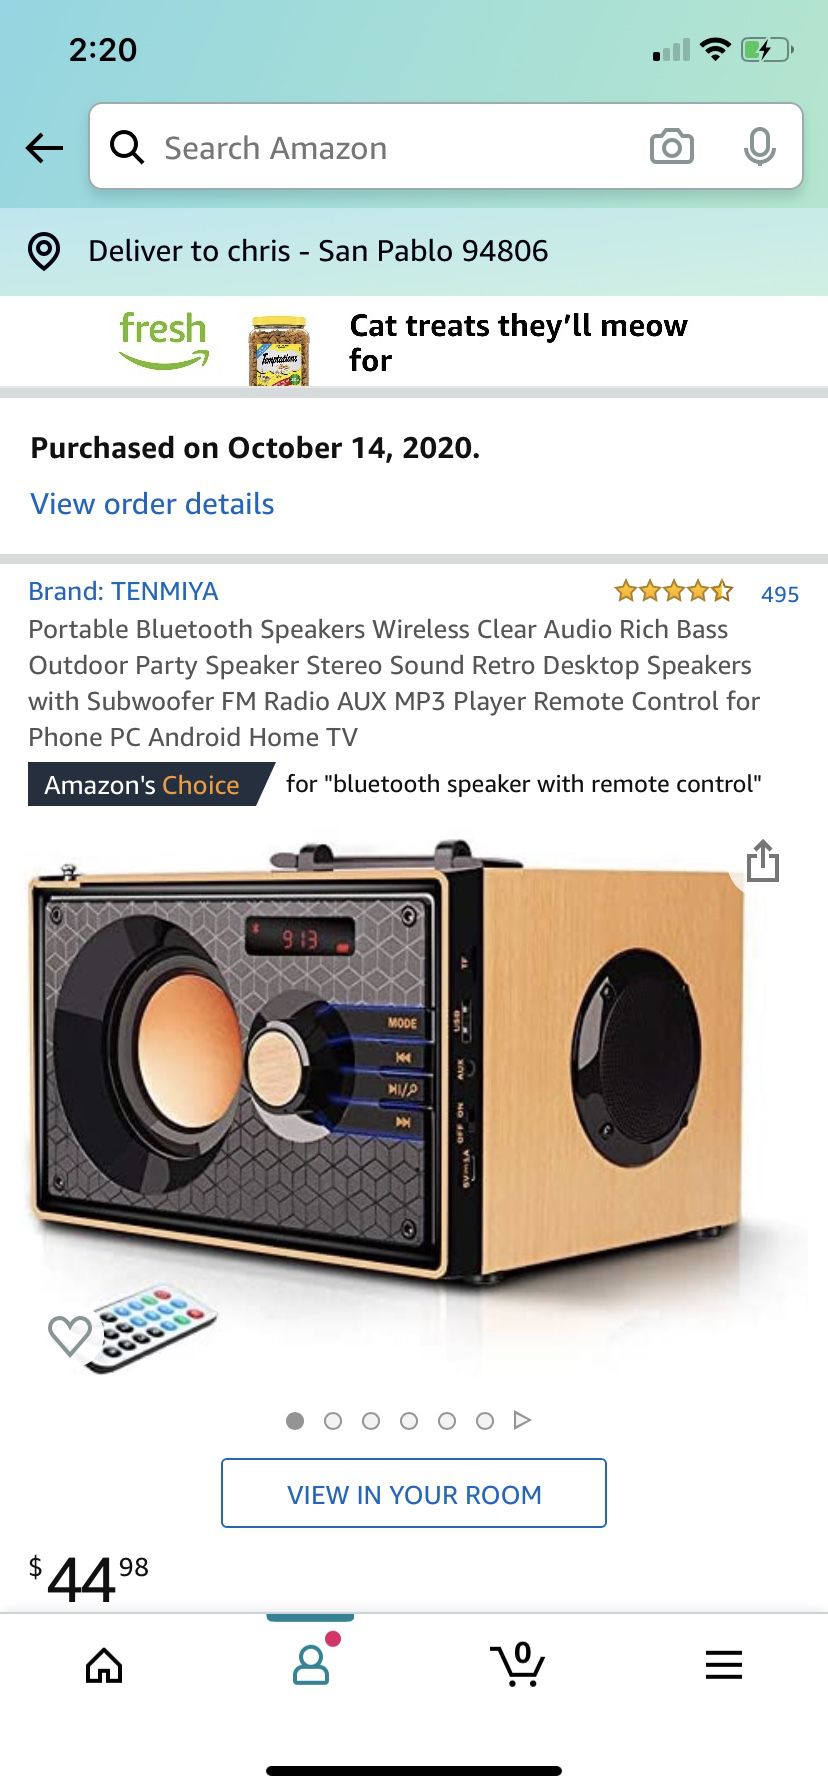 Portable Bluetooth Speakers Wireless Clear Audio Rich Bass Outdoor Party Speaker Stereo Sound Retro Desktop Speakers with Subwoofer FM Radio AUX MP3